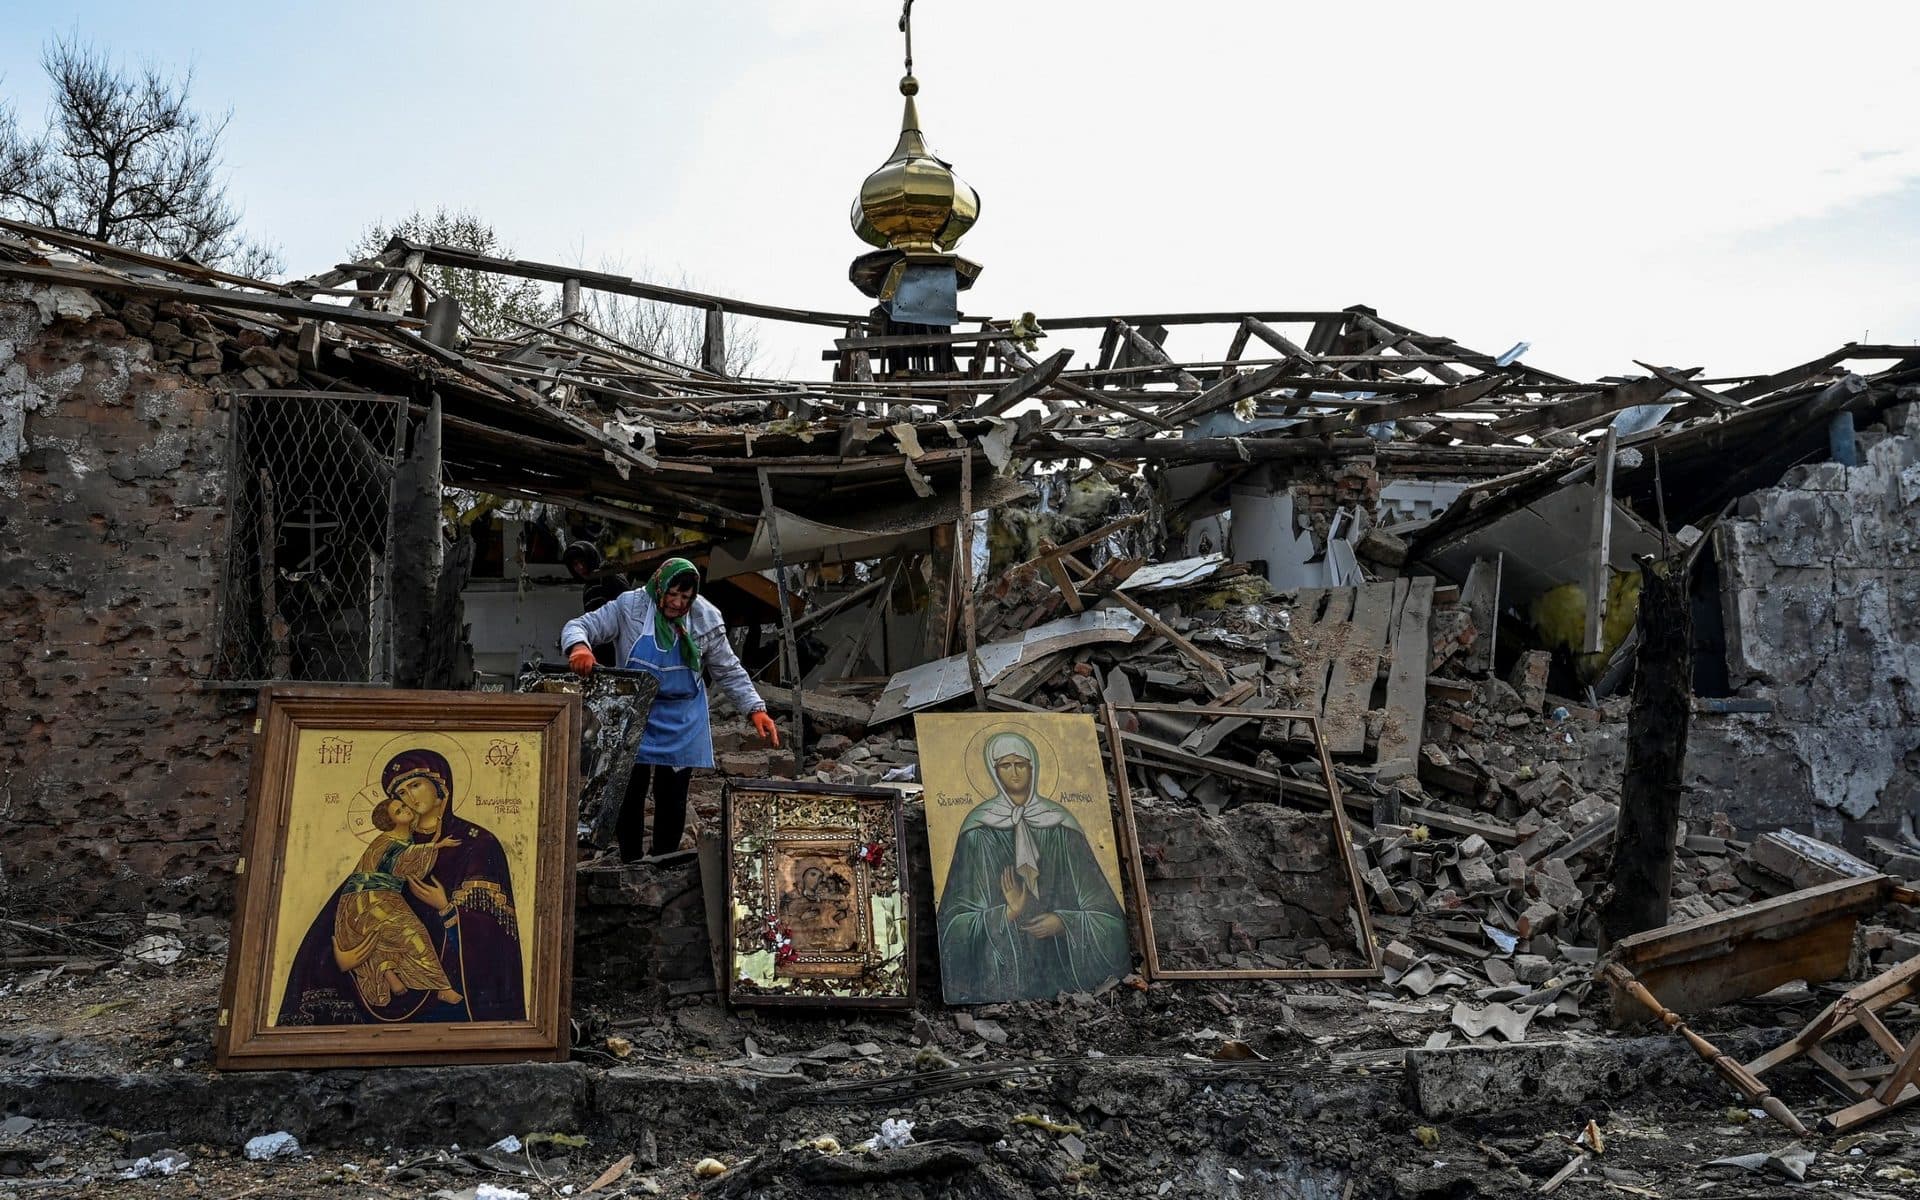 A woman collects Orthodox icons at the site of a church destroyed by a Russian missile strike in the village of Komyshuvakha